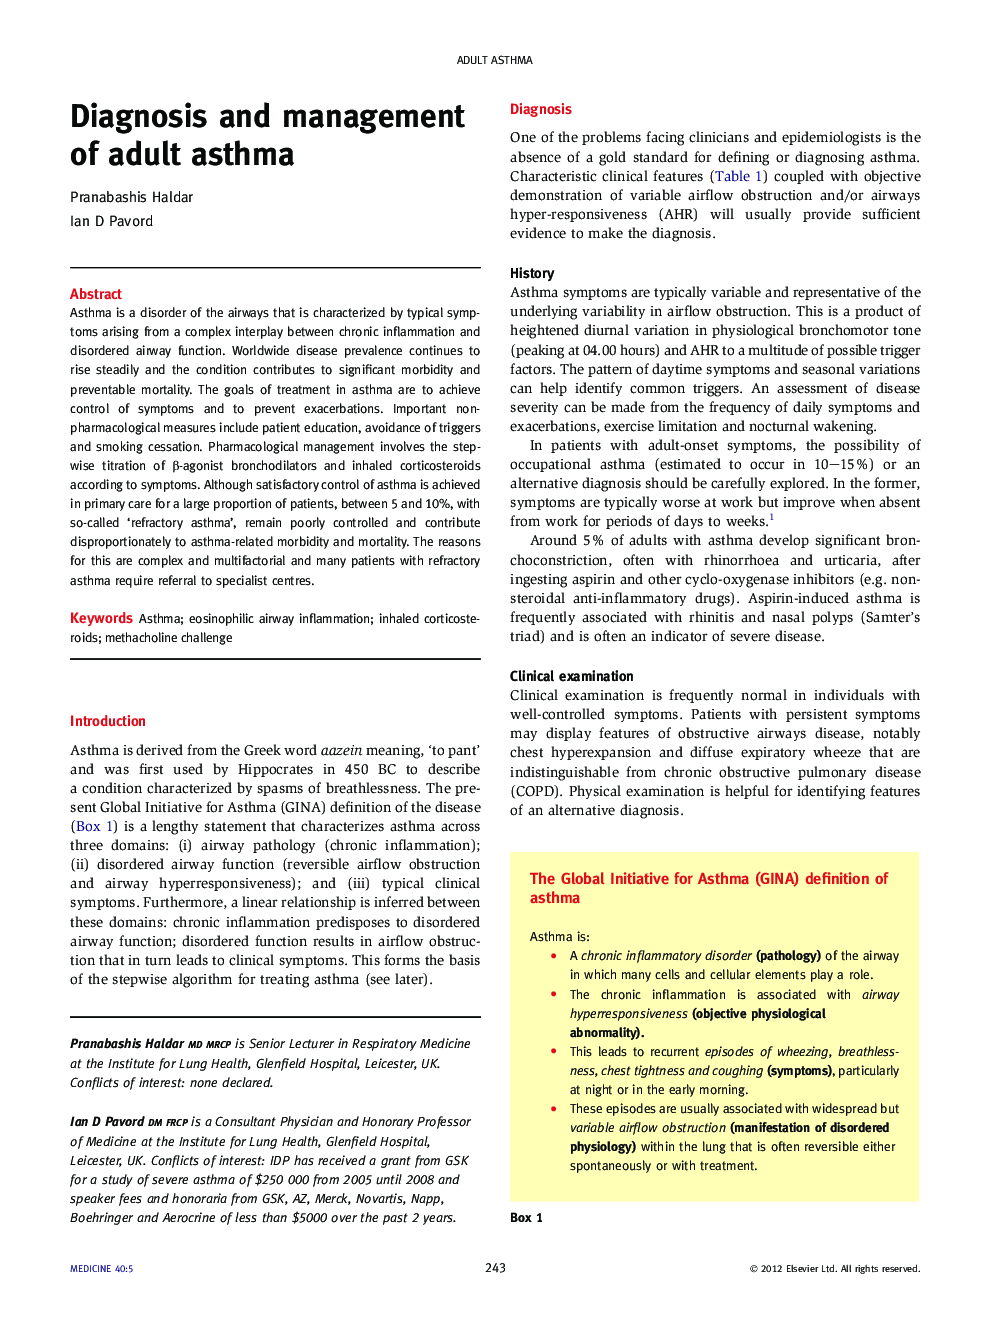 Diagnosis and management of adult asthma